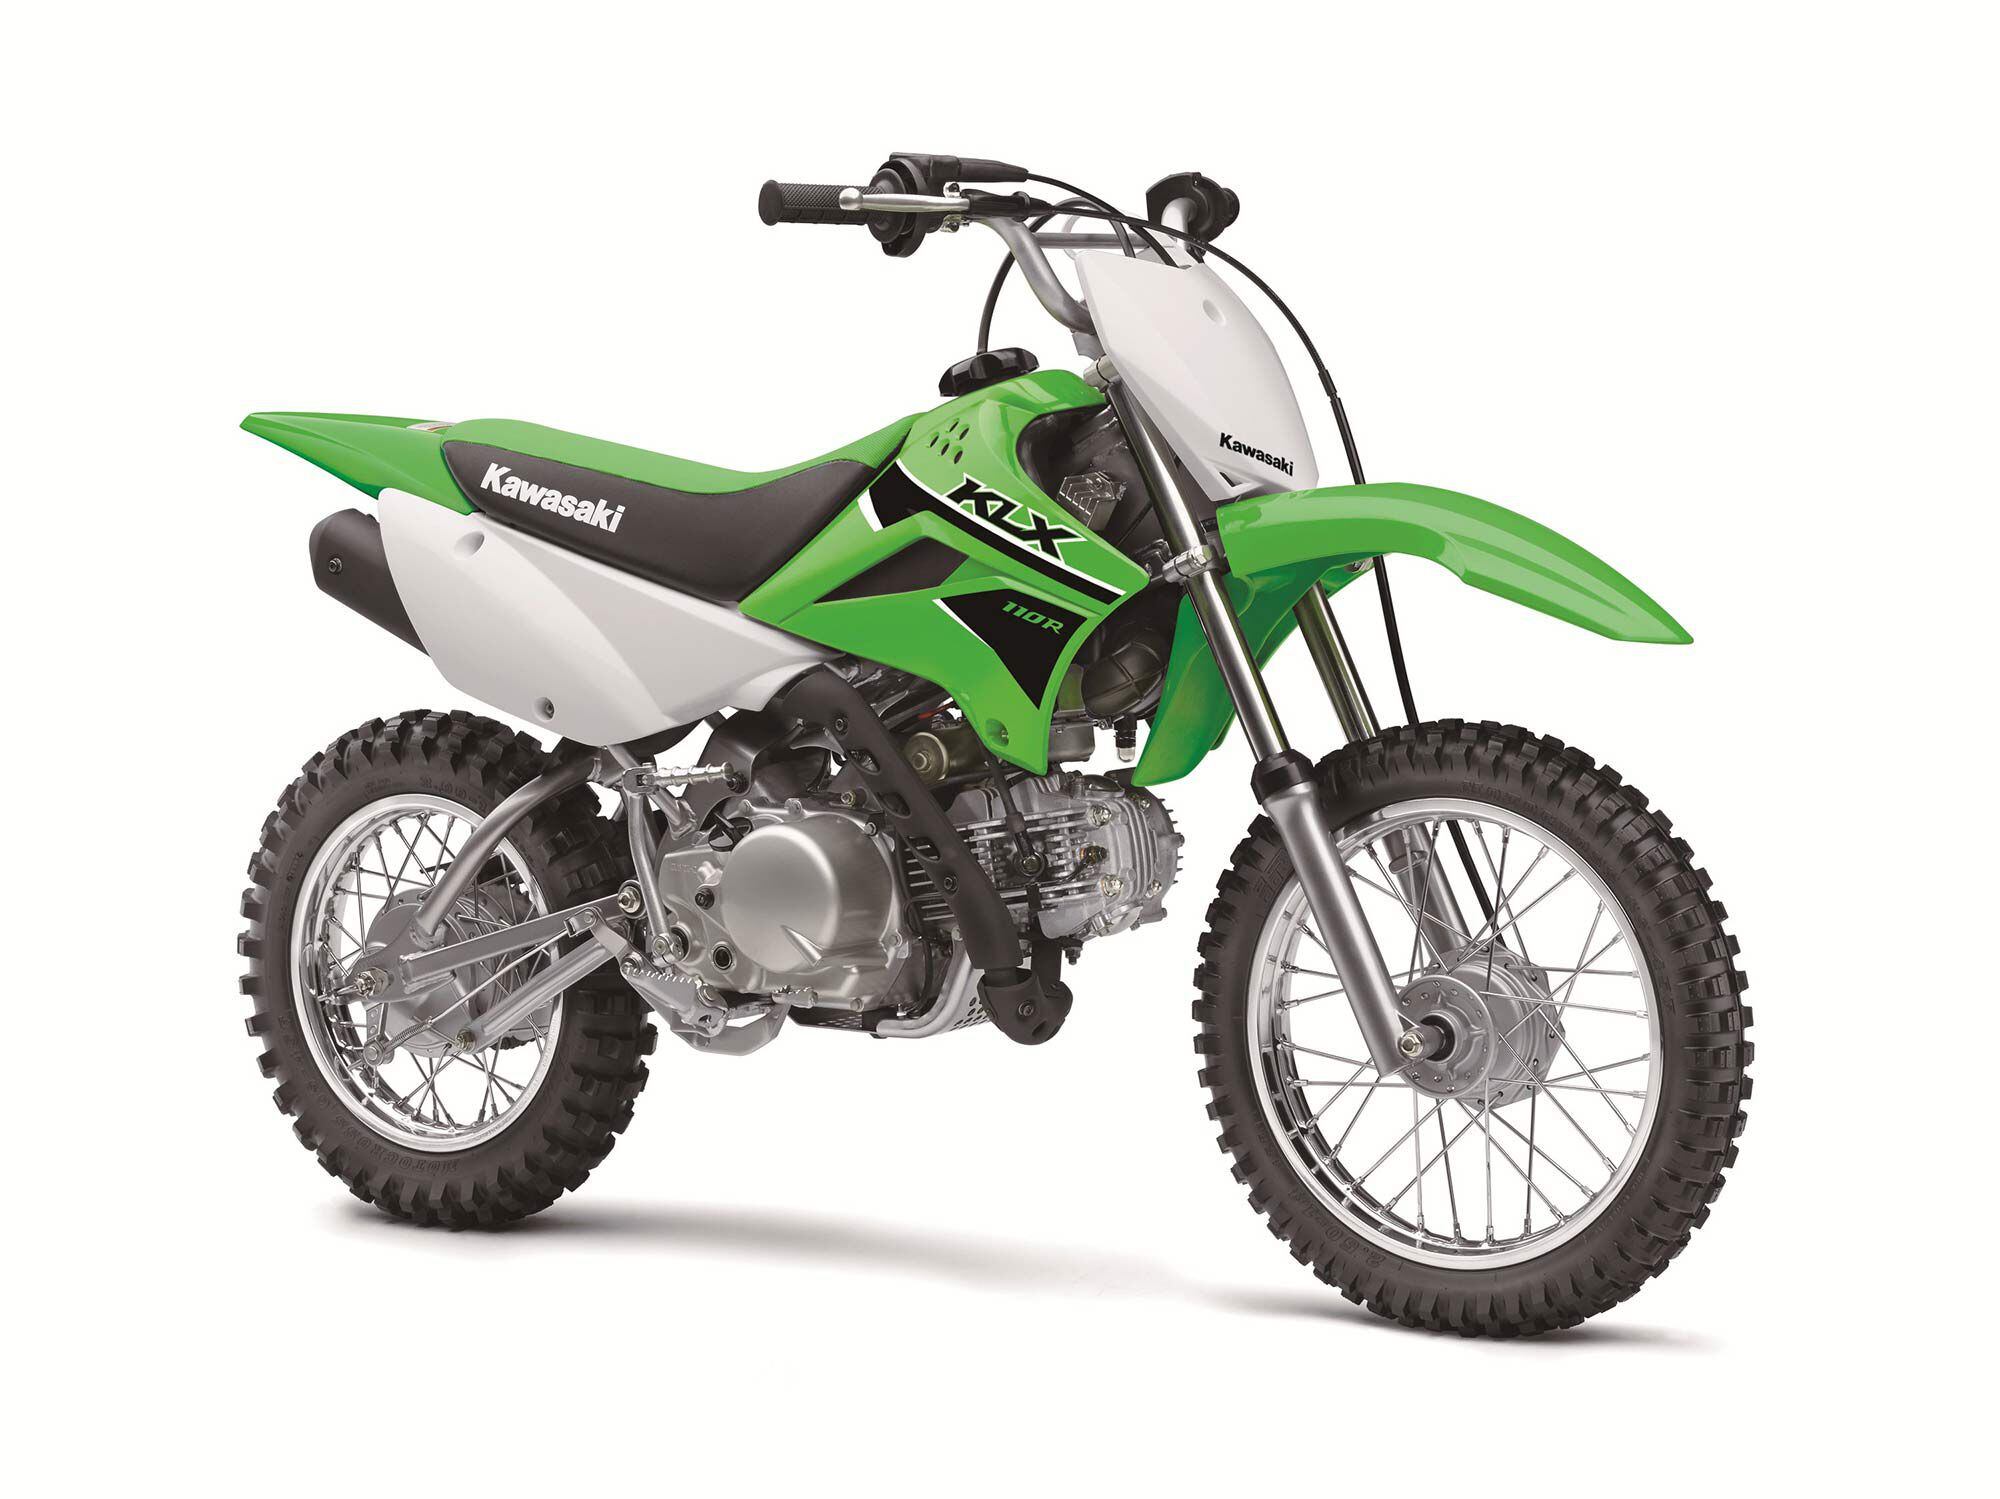 The KLX110R offers a more than capable platform for younger riders and is offered with an automatic transmission. The KLX110R L, on the other hand, features a manual transmission.